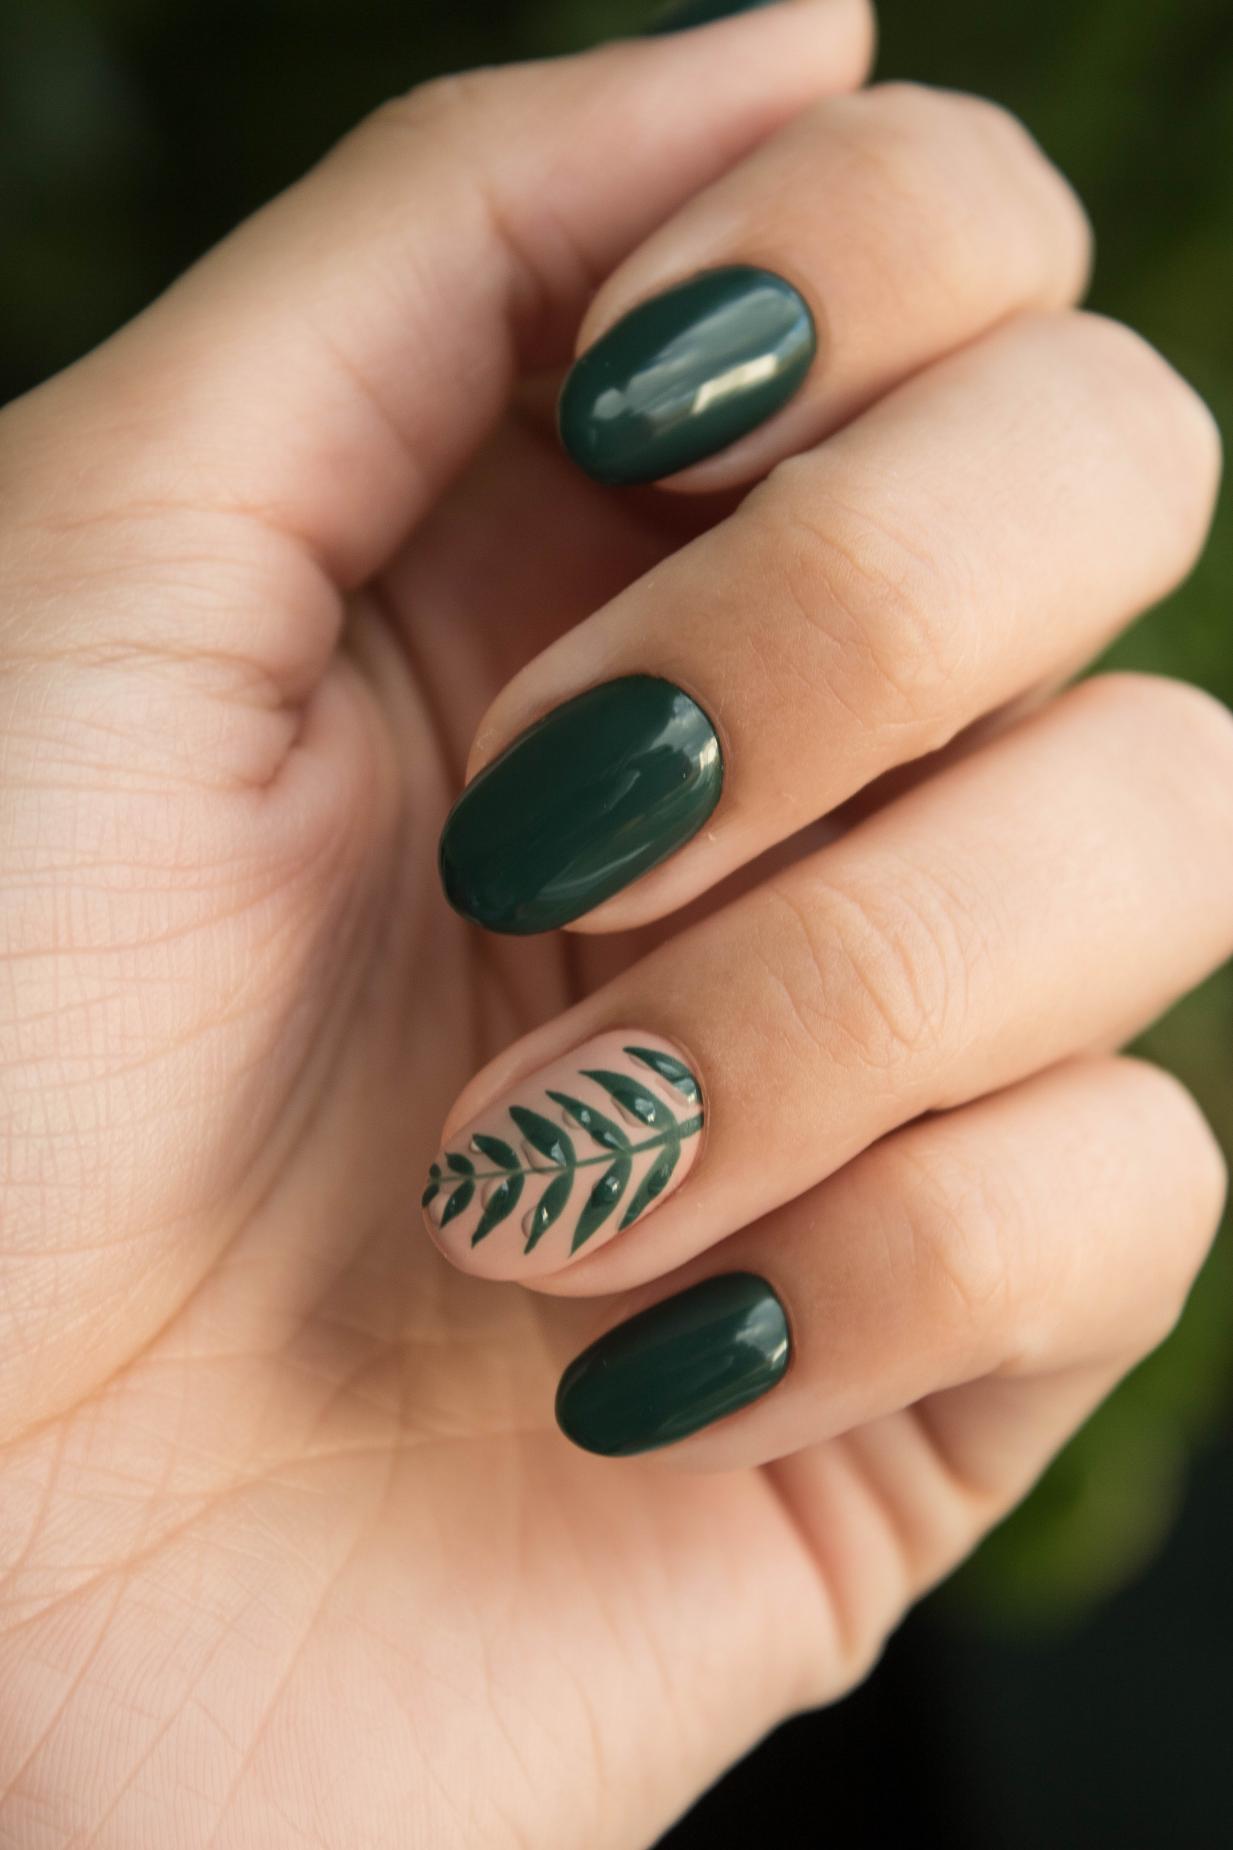 The Role of Nail Art in Self-Care-Image 1